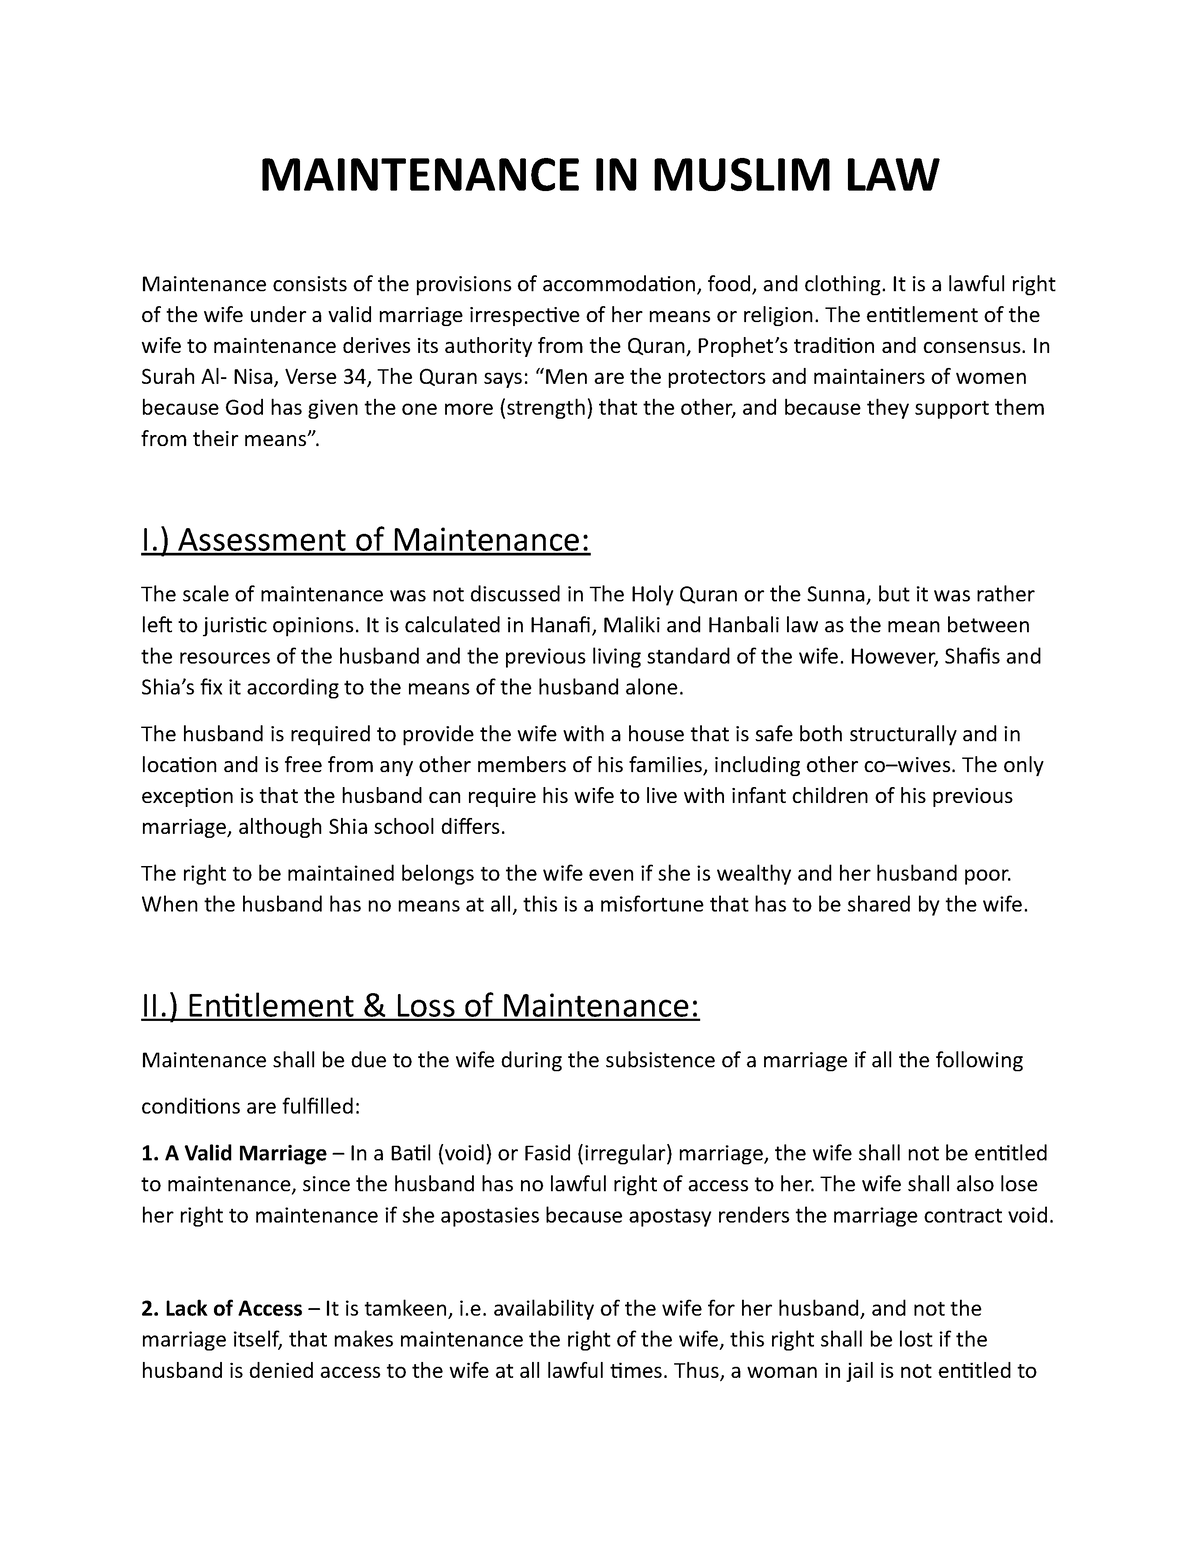 maintenance under muslim law research paper